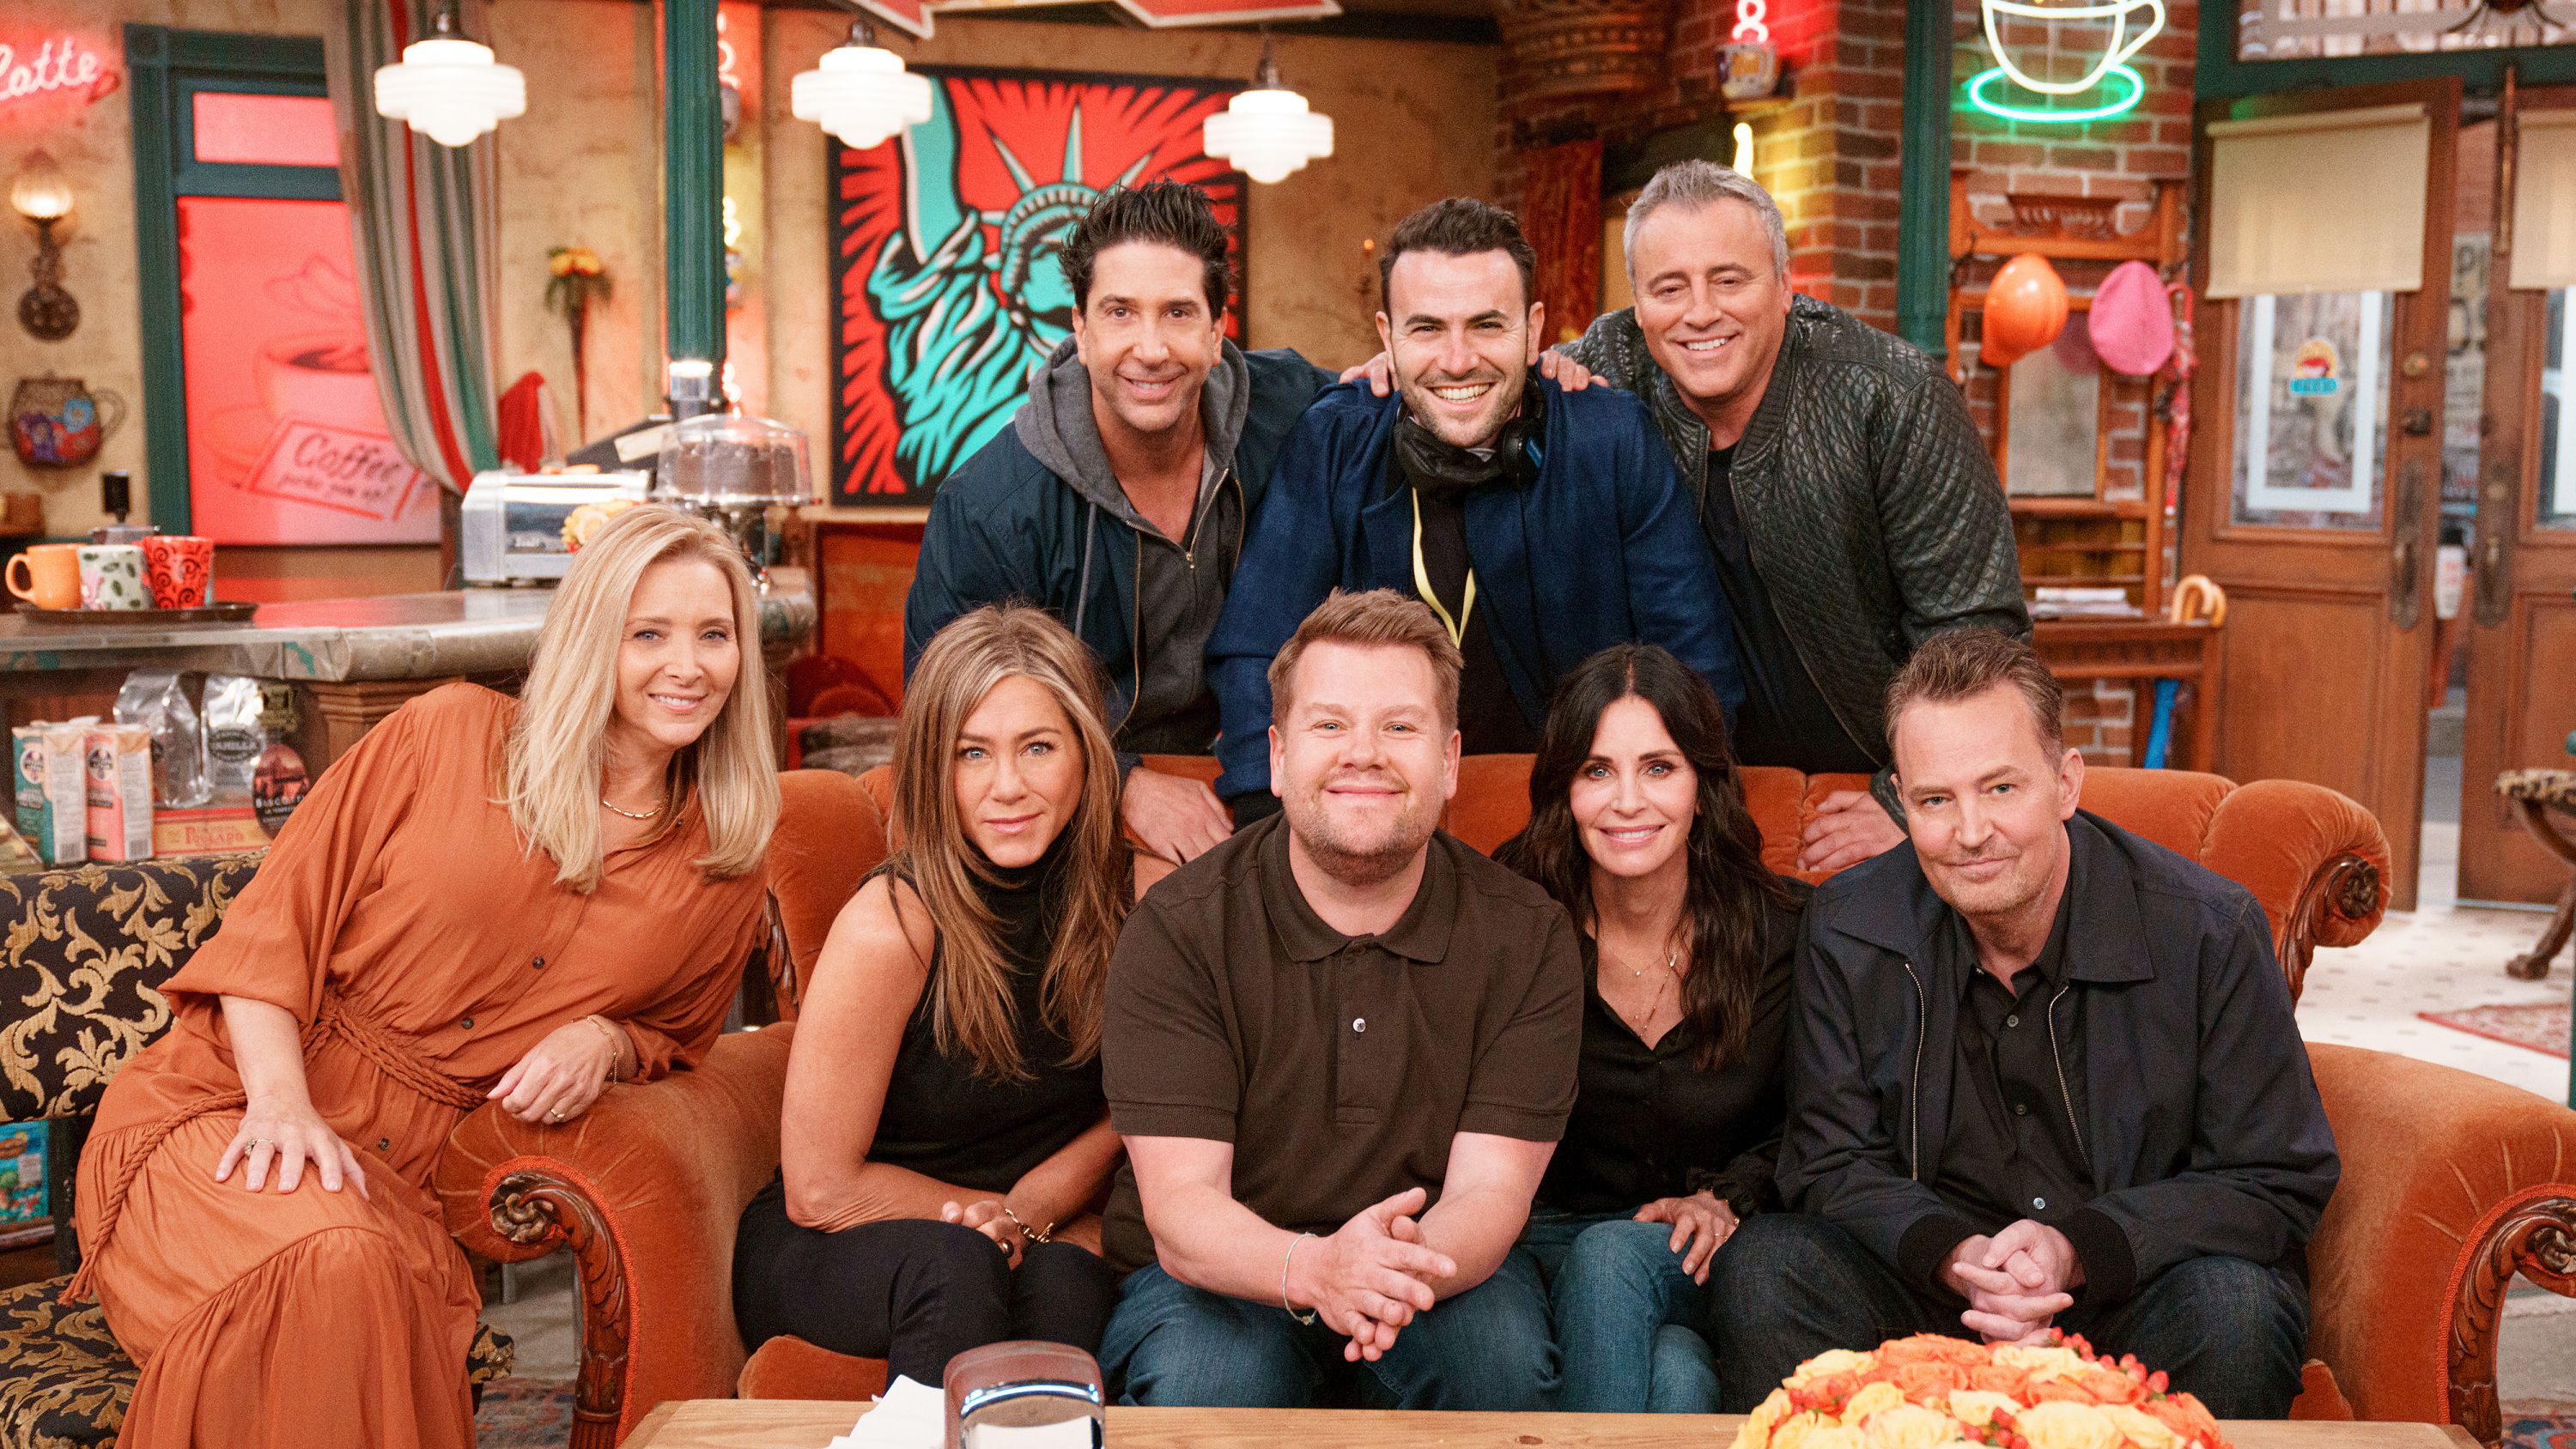 The Ultimate Friends Reunion Revealing The Most Stunning Revelations